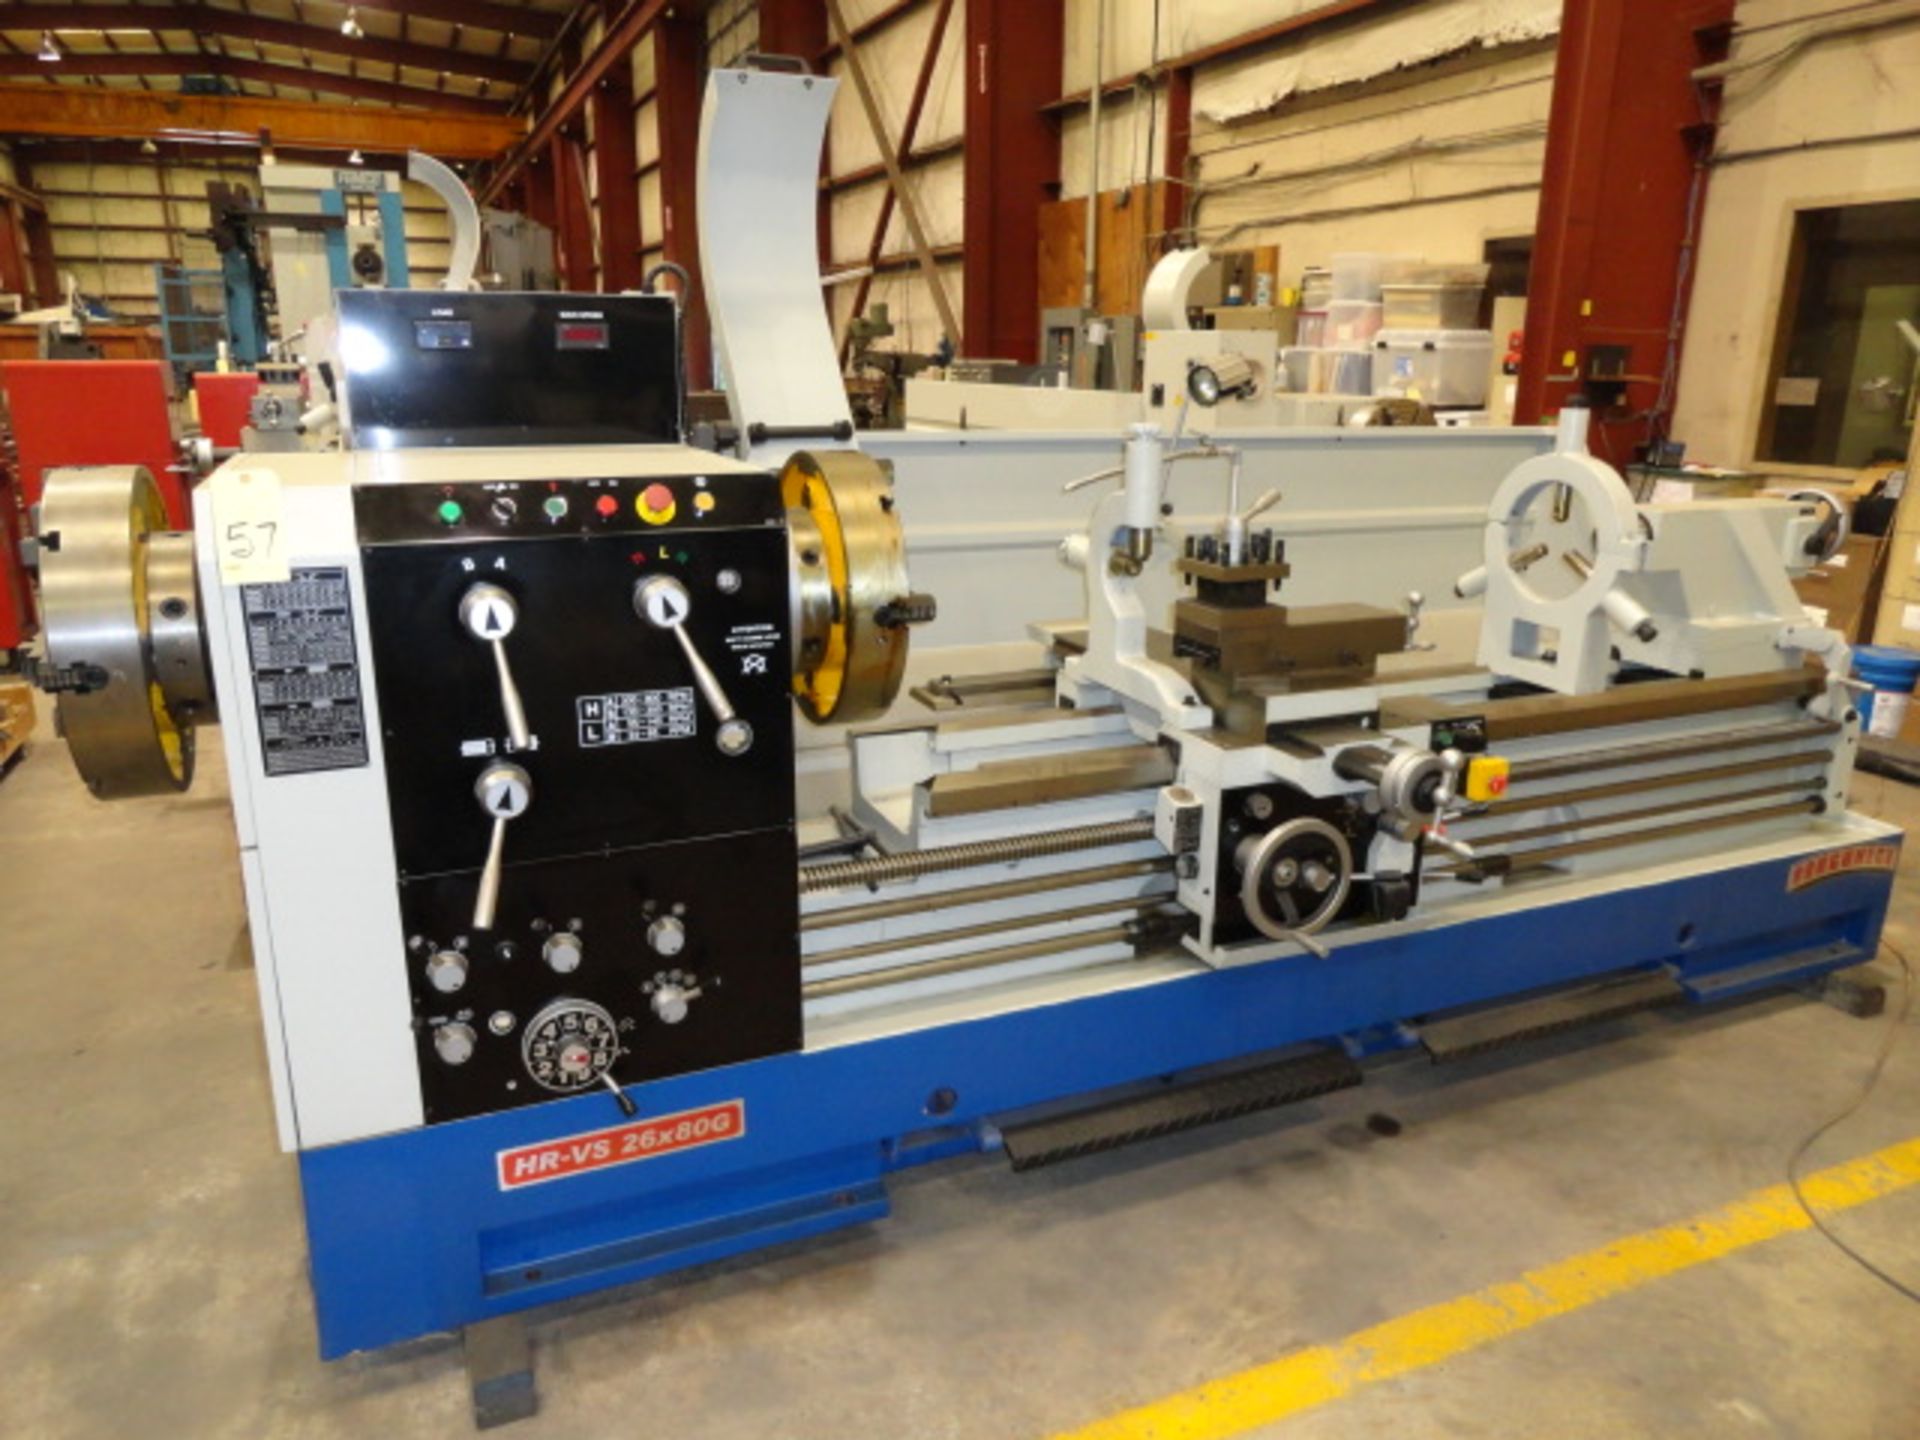 HOLLOW SPINDLE LATHE, ROUGHNECK (CHU SHING) 26" X 80" MDL. HR-VS (NEW), 26-7/8” sw. over bed, 17-3/